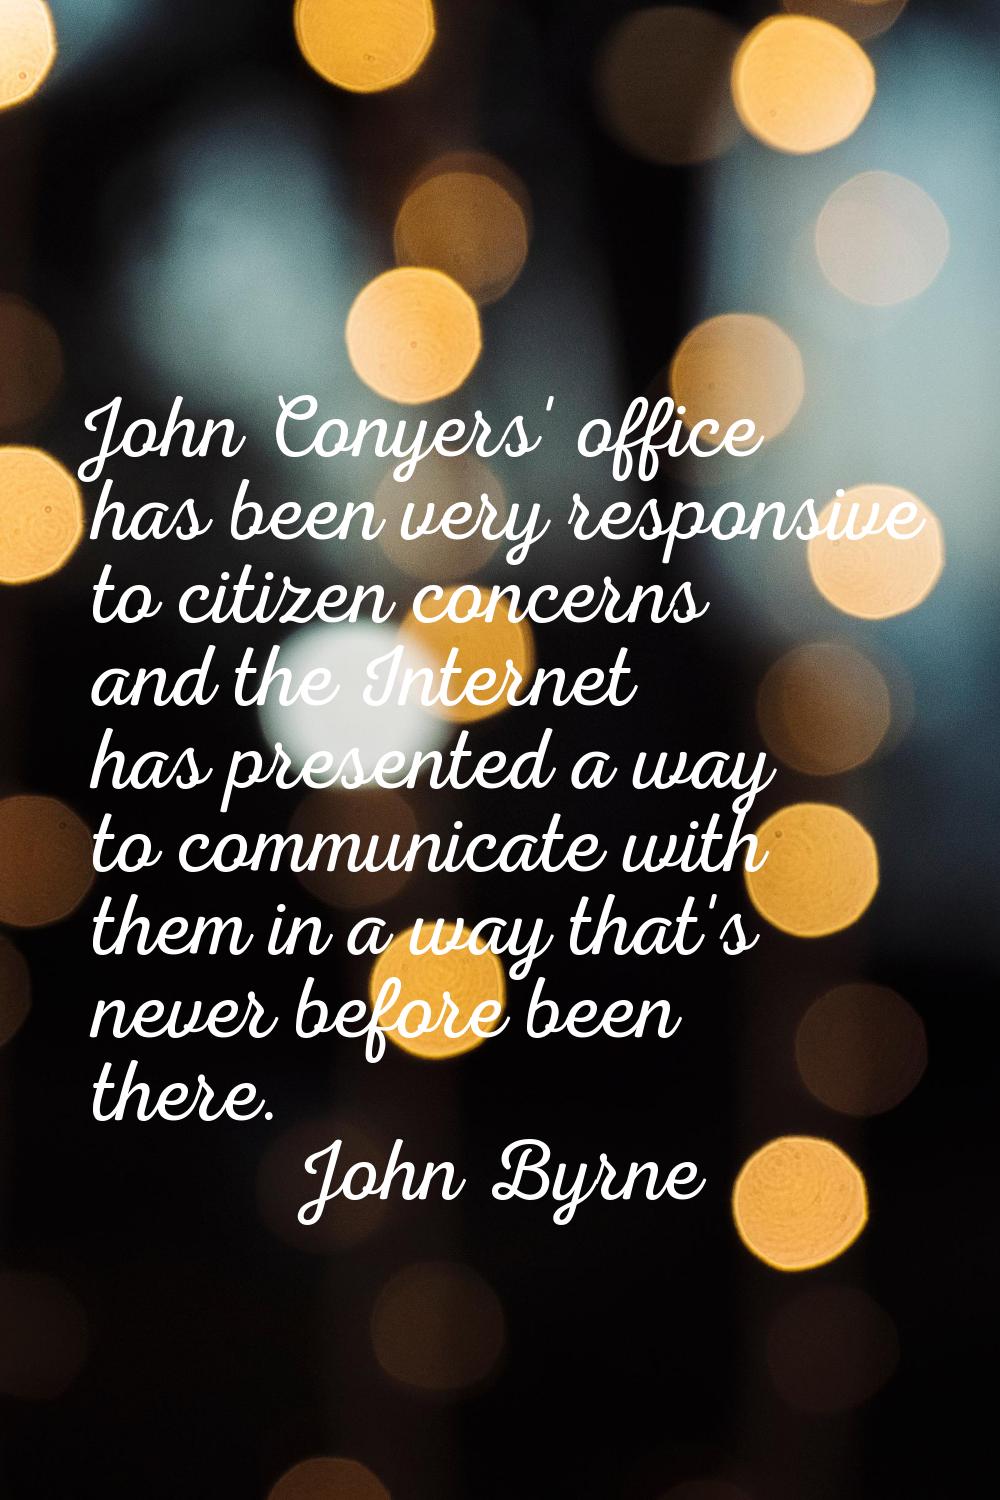 John Conyers' office has been very responsive to citizen concerns and the Internet has presented a 